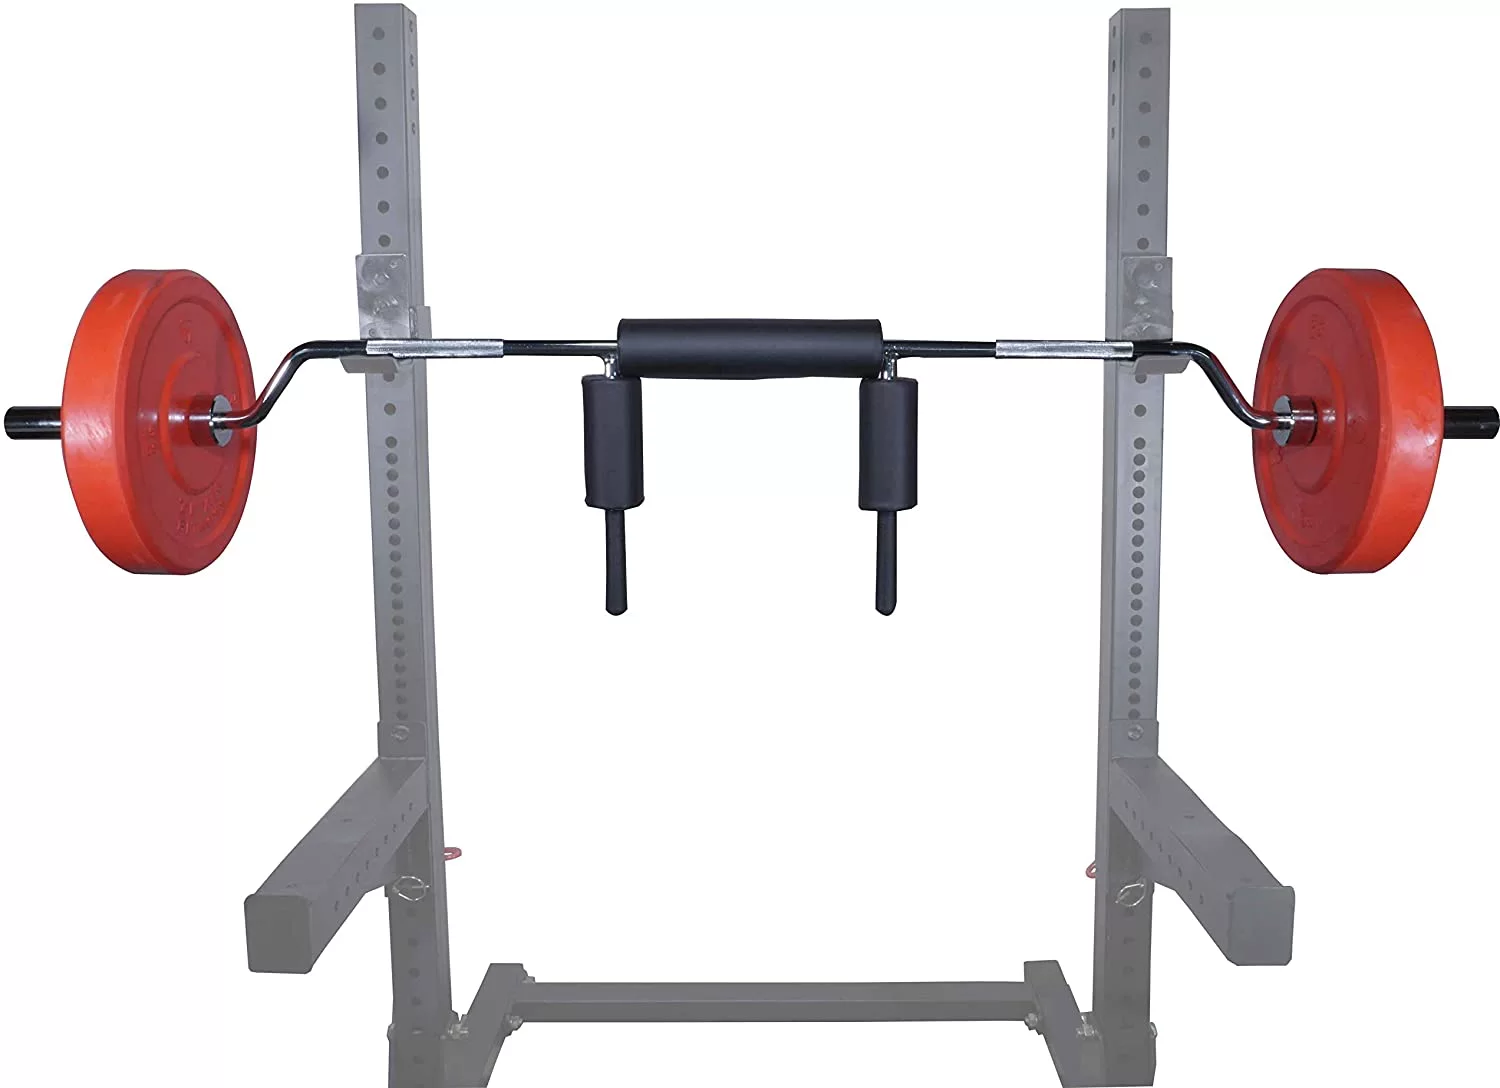 Titan-Fitness-Safety-Squat-2-Olympic-Plate-Weightlifting-Bar-700lb-Max-Fitness-Workout-Equipment